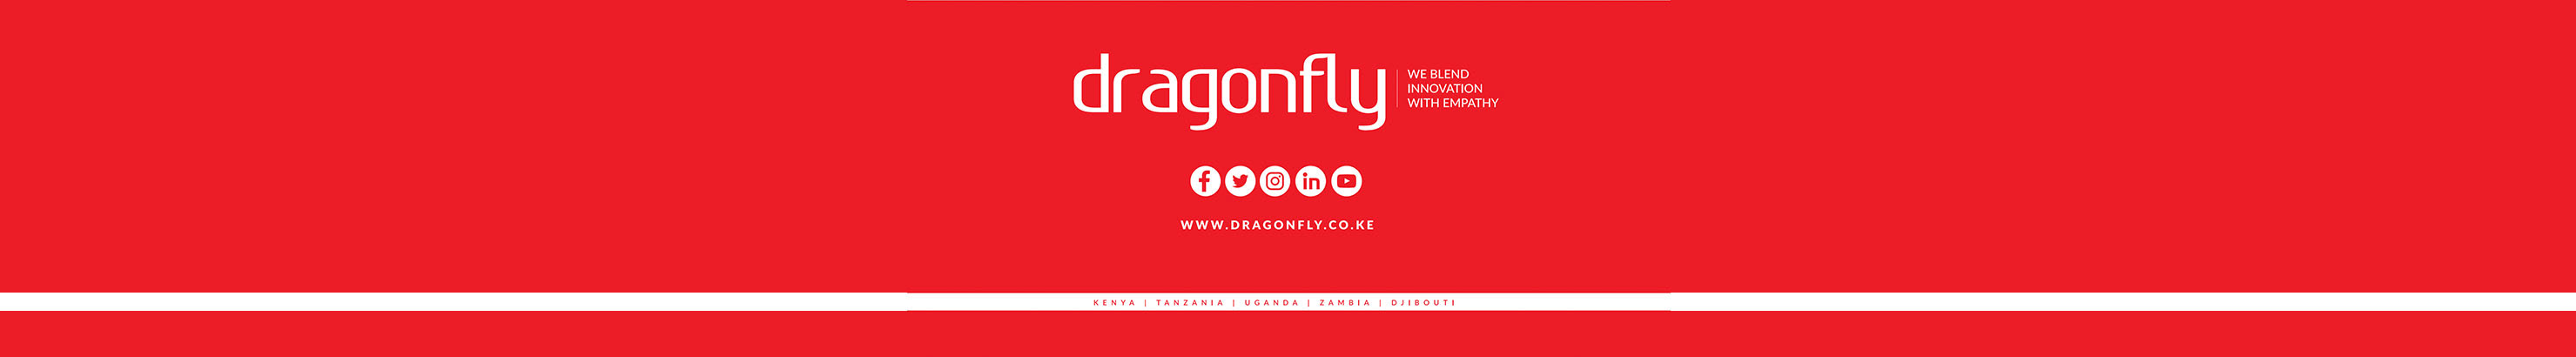 Dragonfly Africa's profile banner